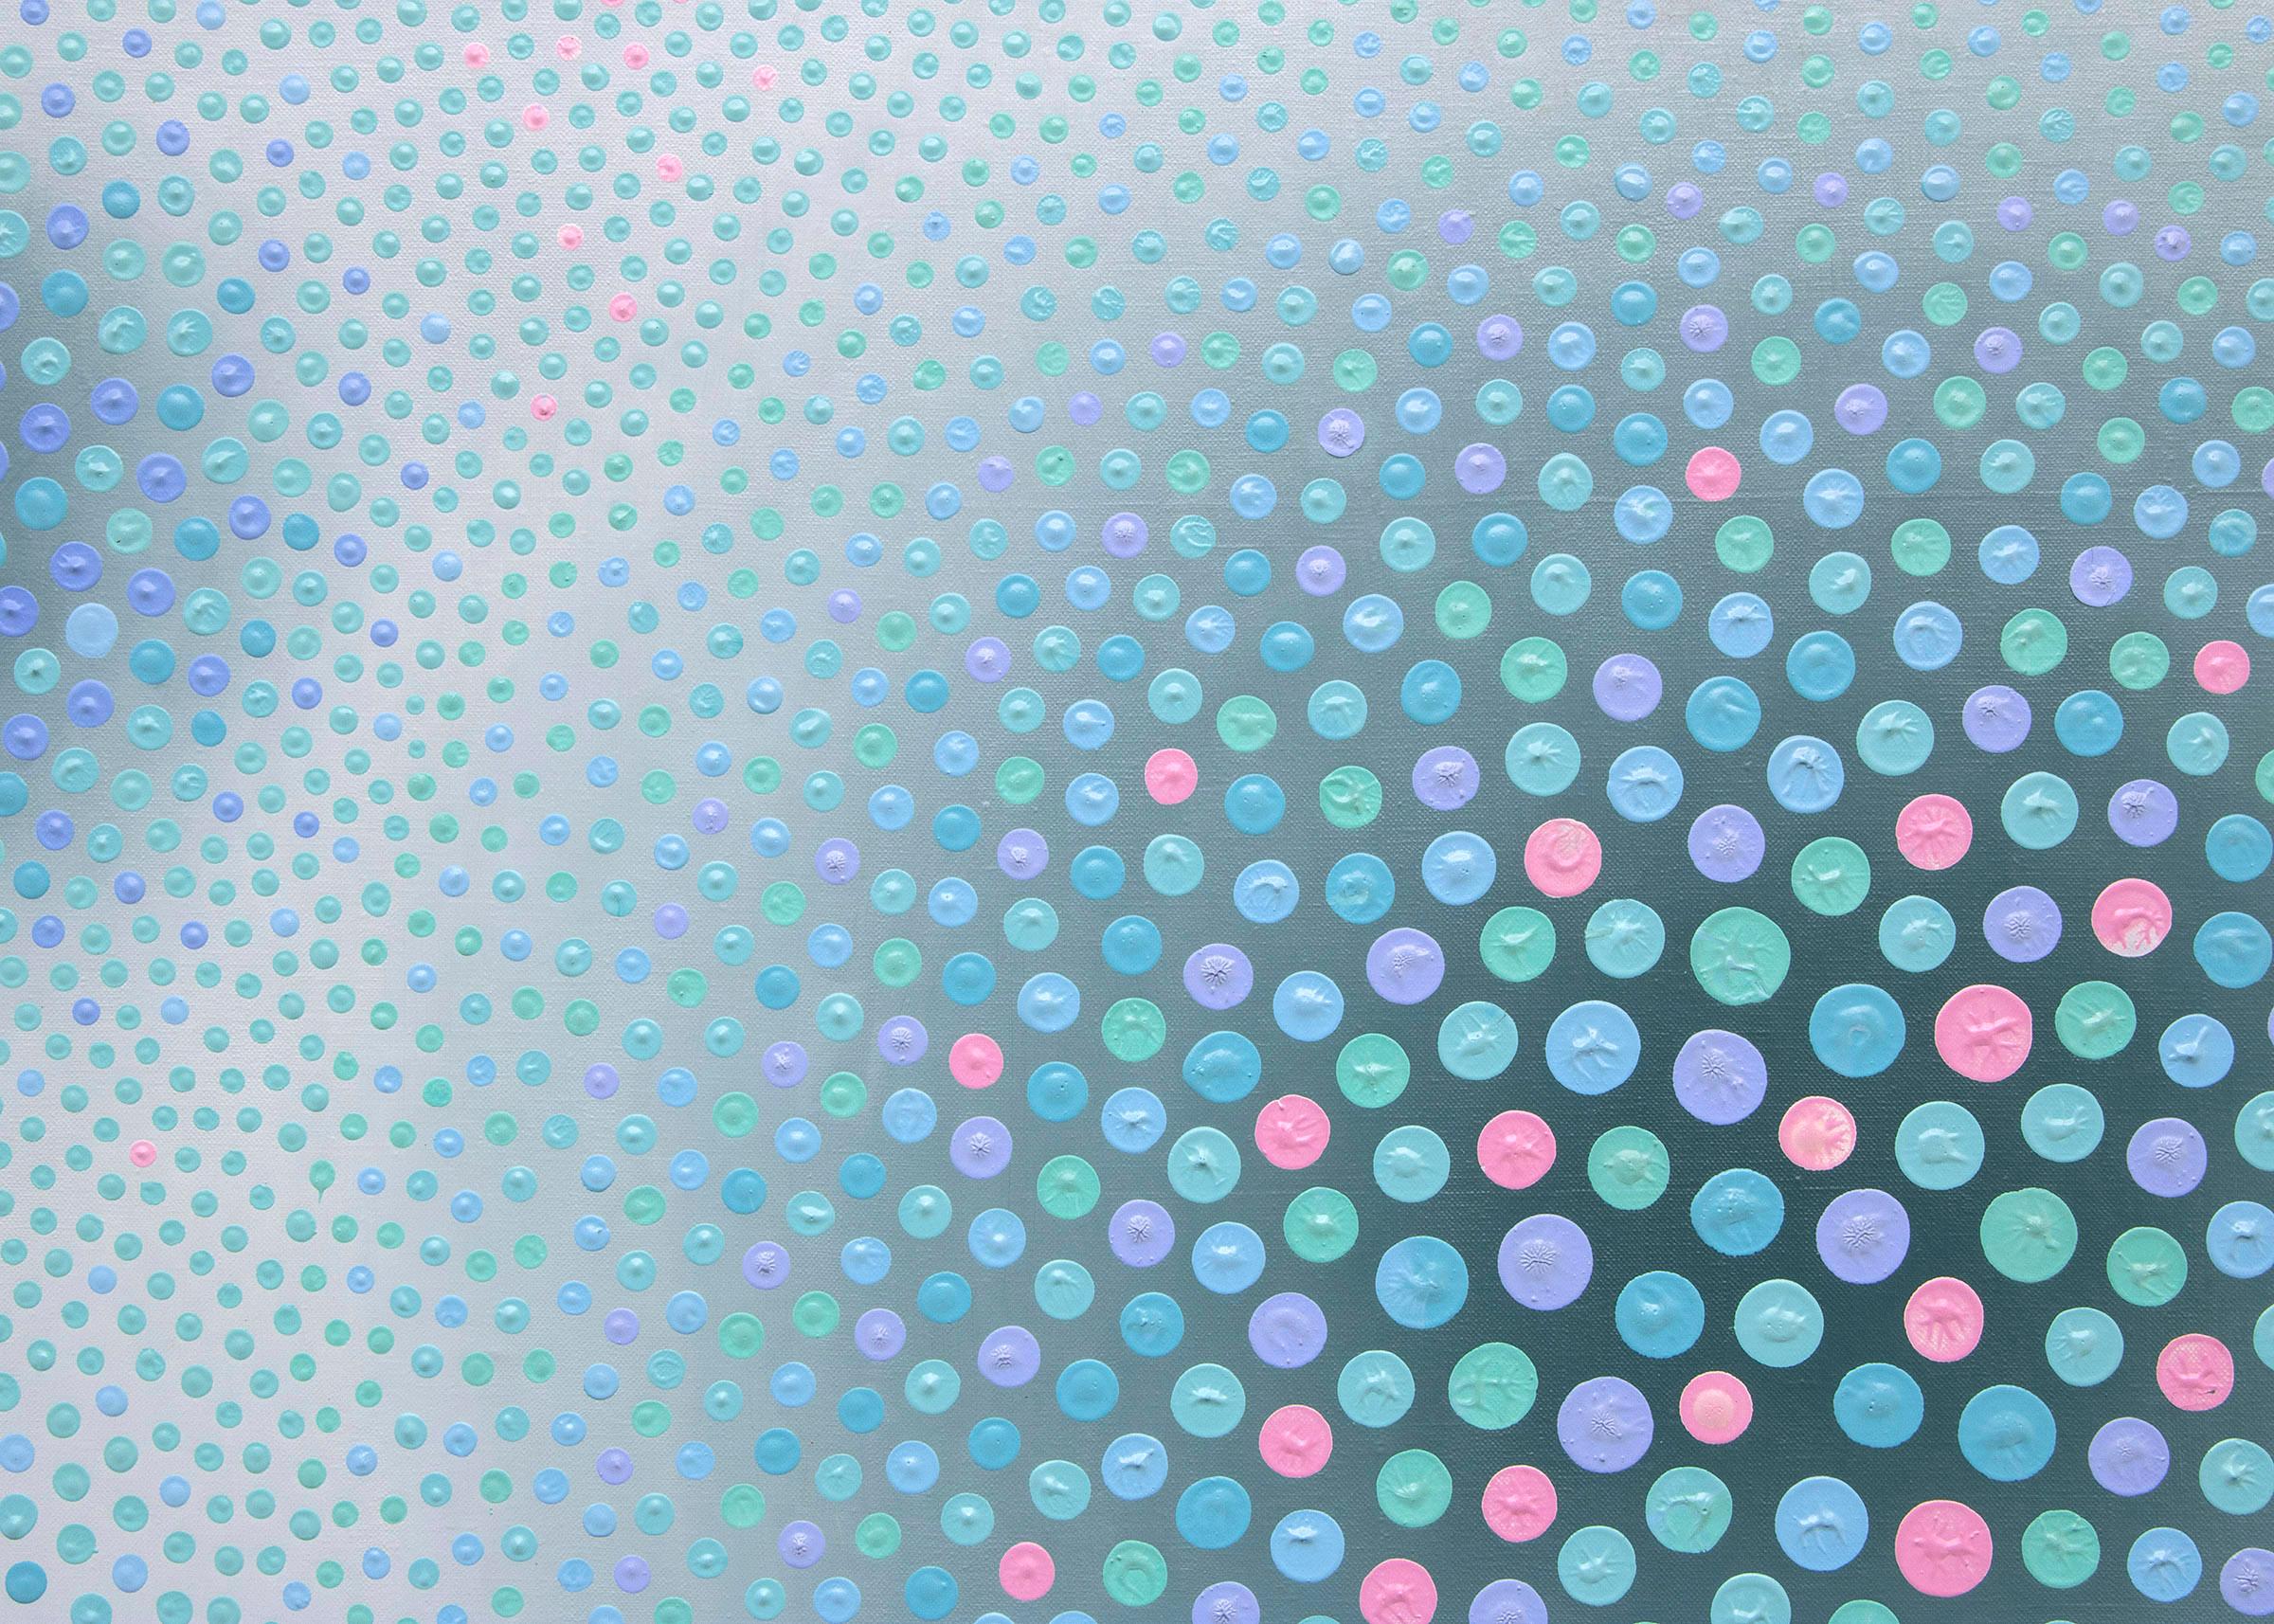 Cool Colors in Space #22 (Abstract Dot Painting) 1